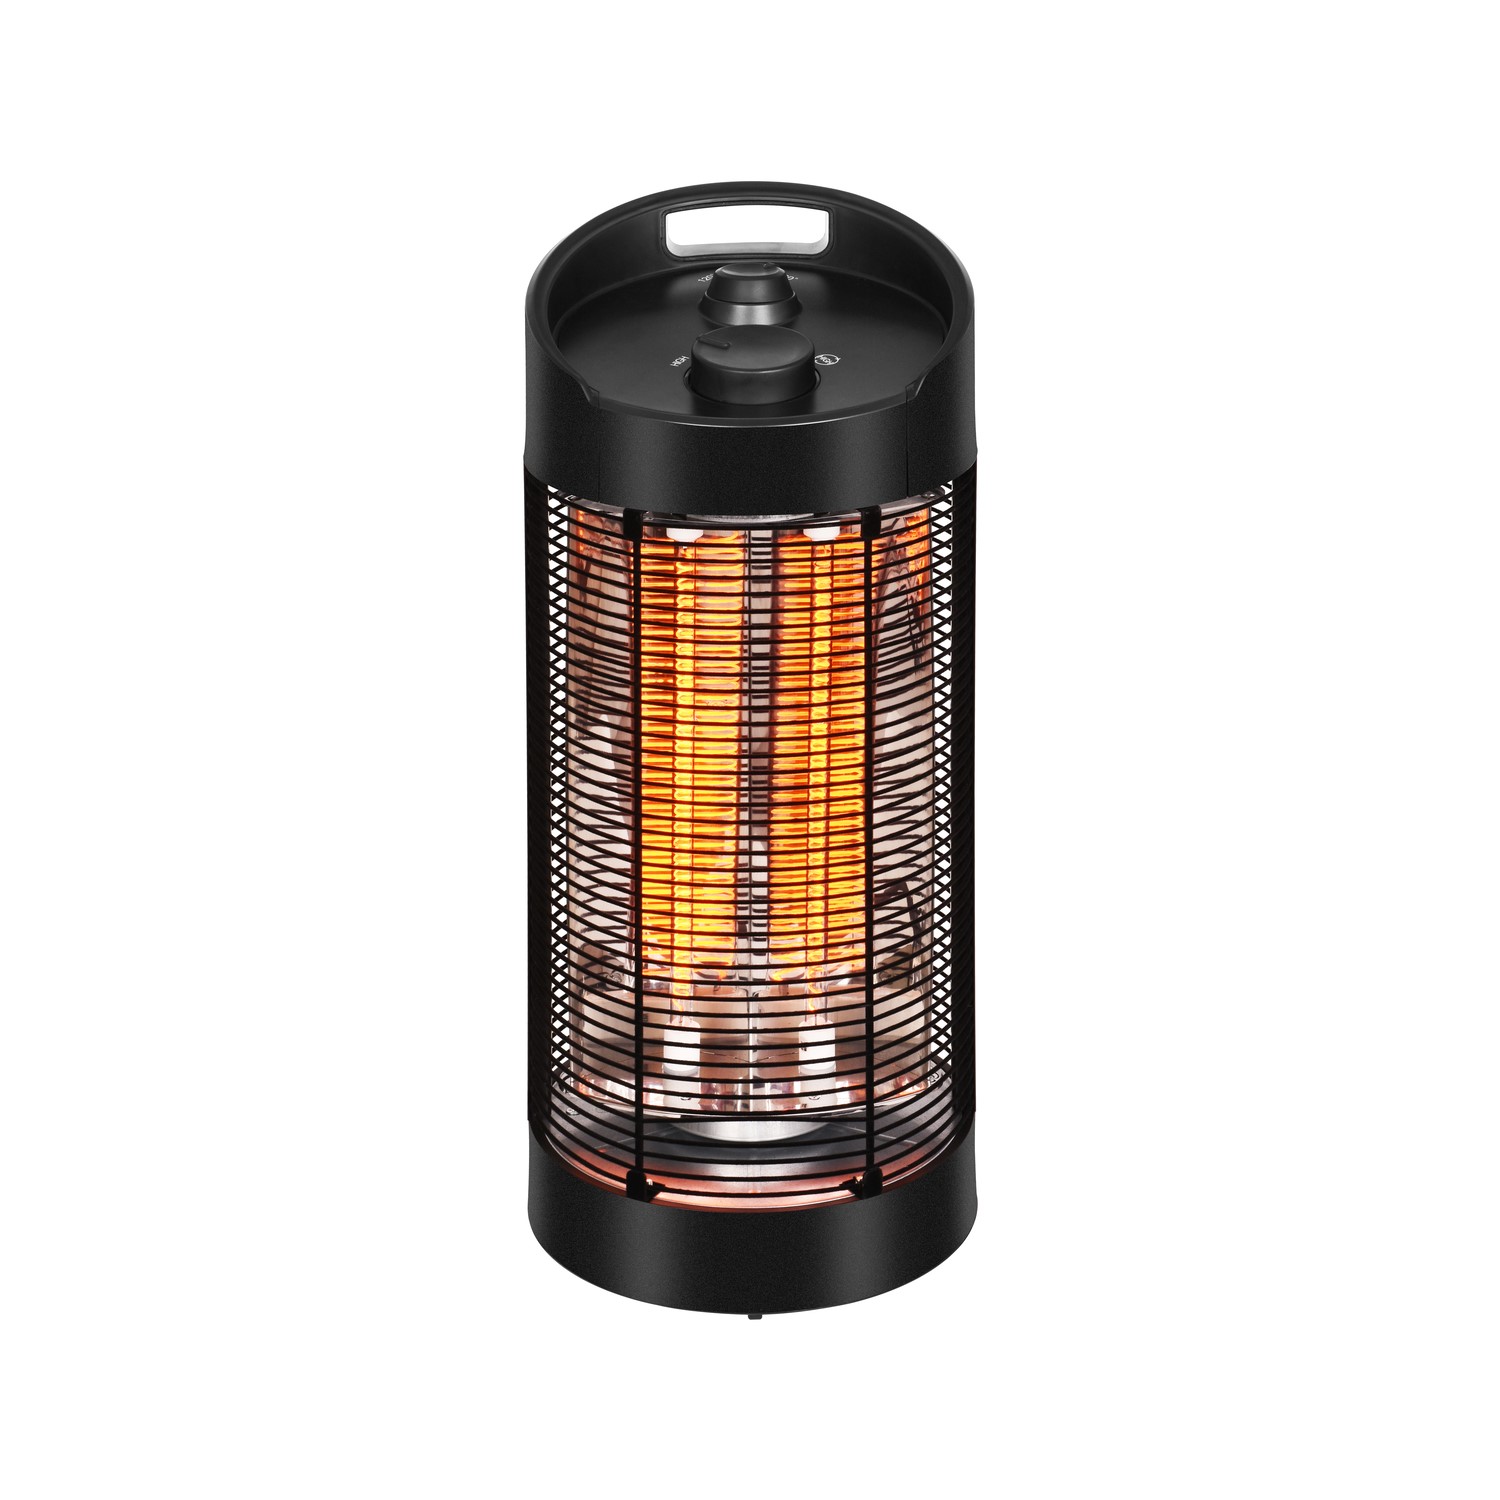 Electriq Table Top Electric Patio Heater 1 2kw With Oscillating Settings Eqodett Appliances Direct - Electric Table Patio Heater